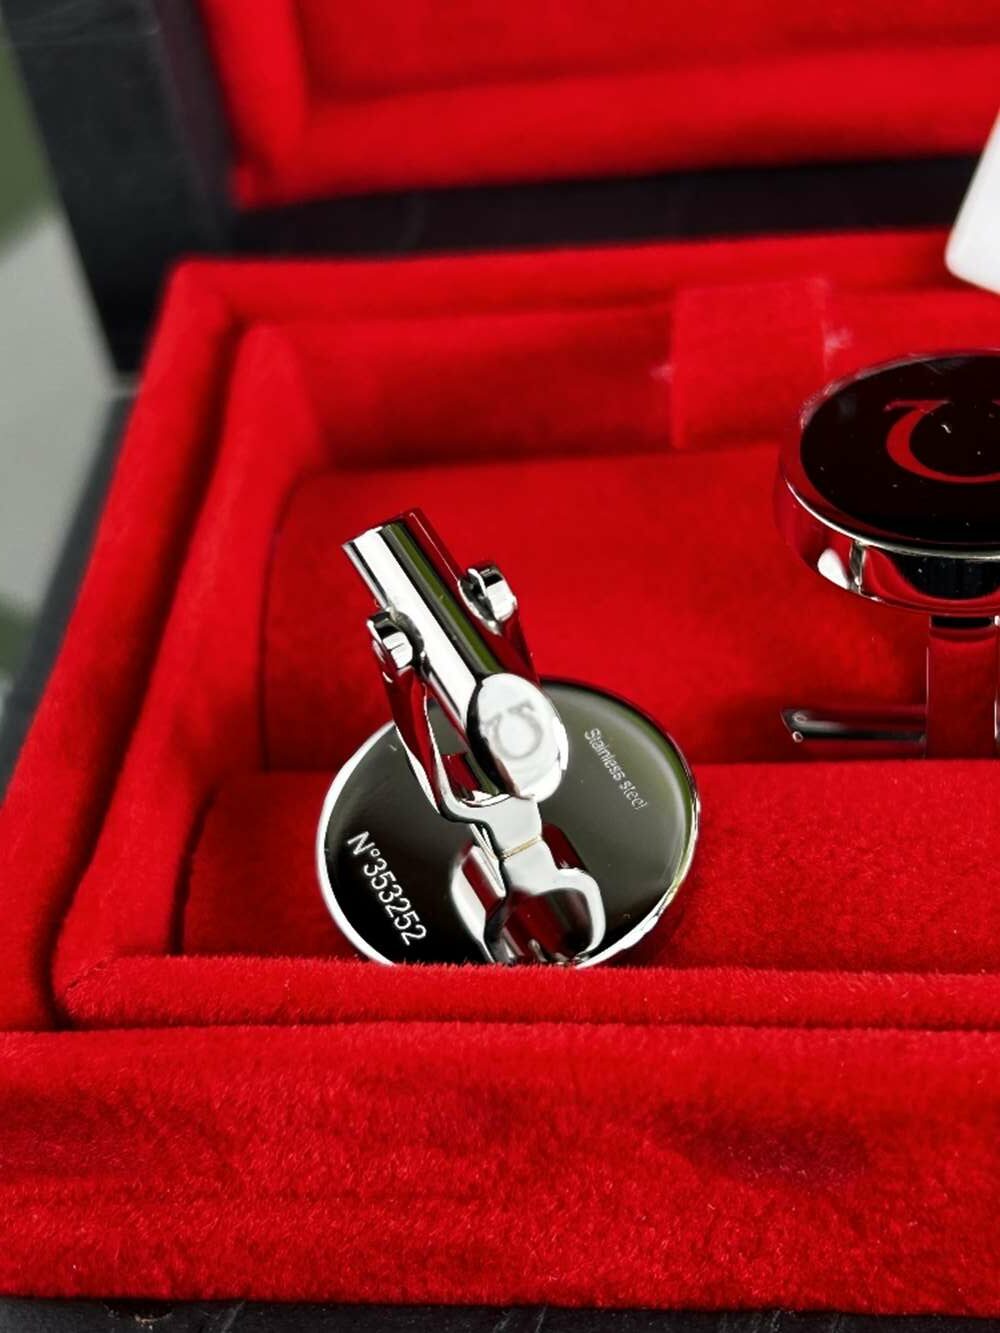 Omega Official Merchandise Gent`s Cufflinks - Image 4 of 8